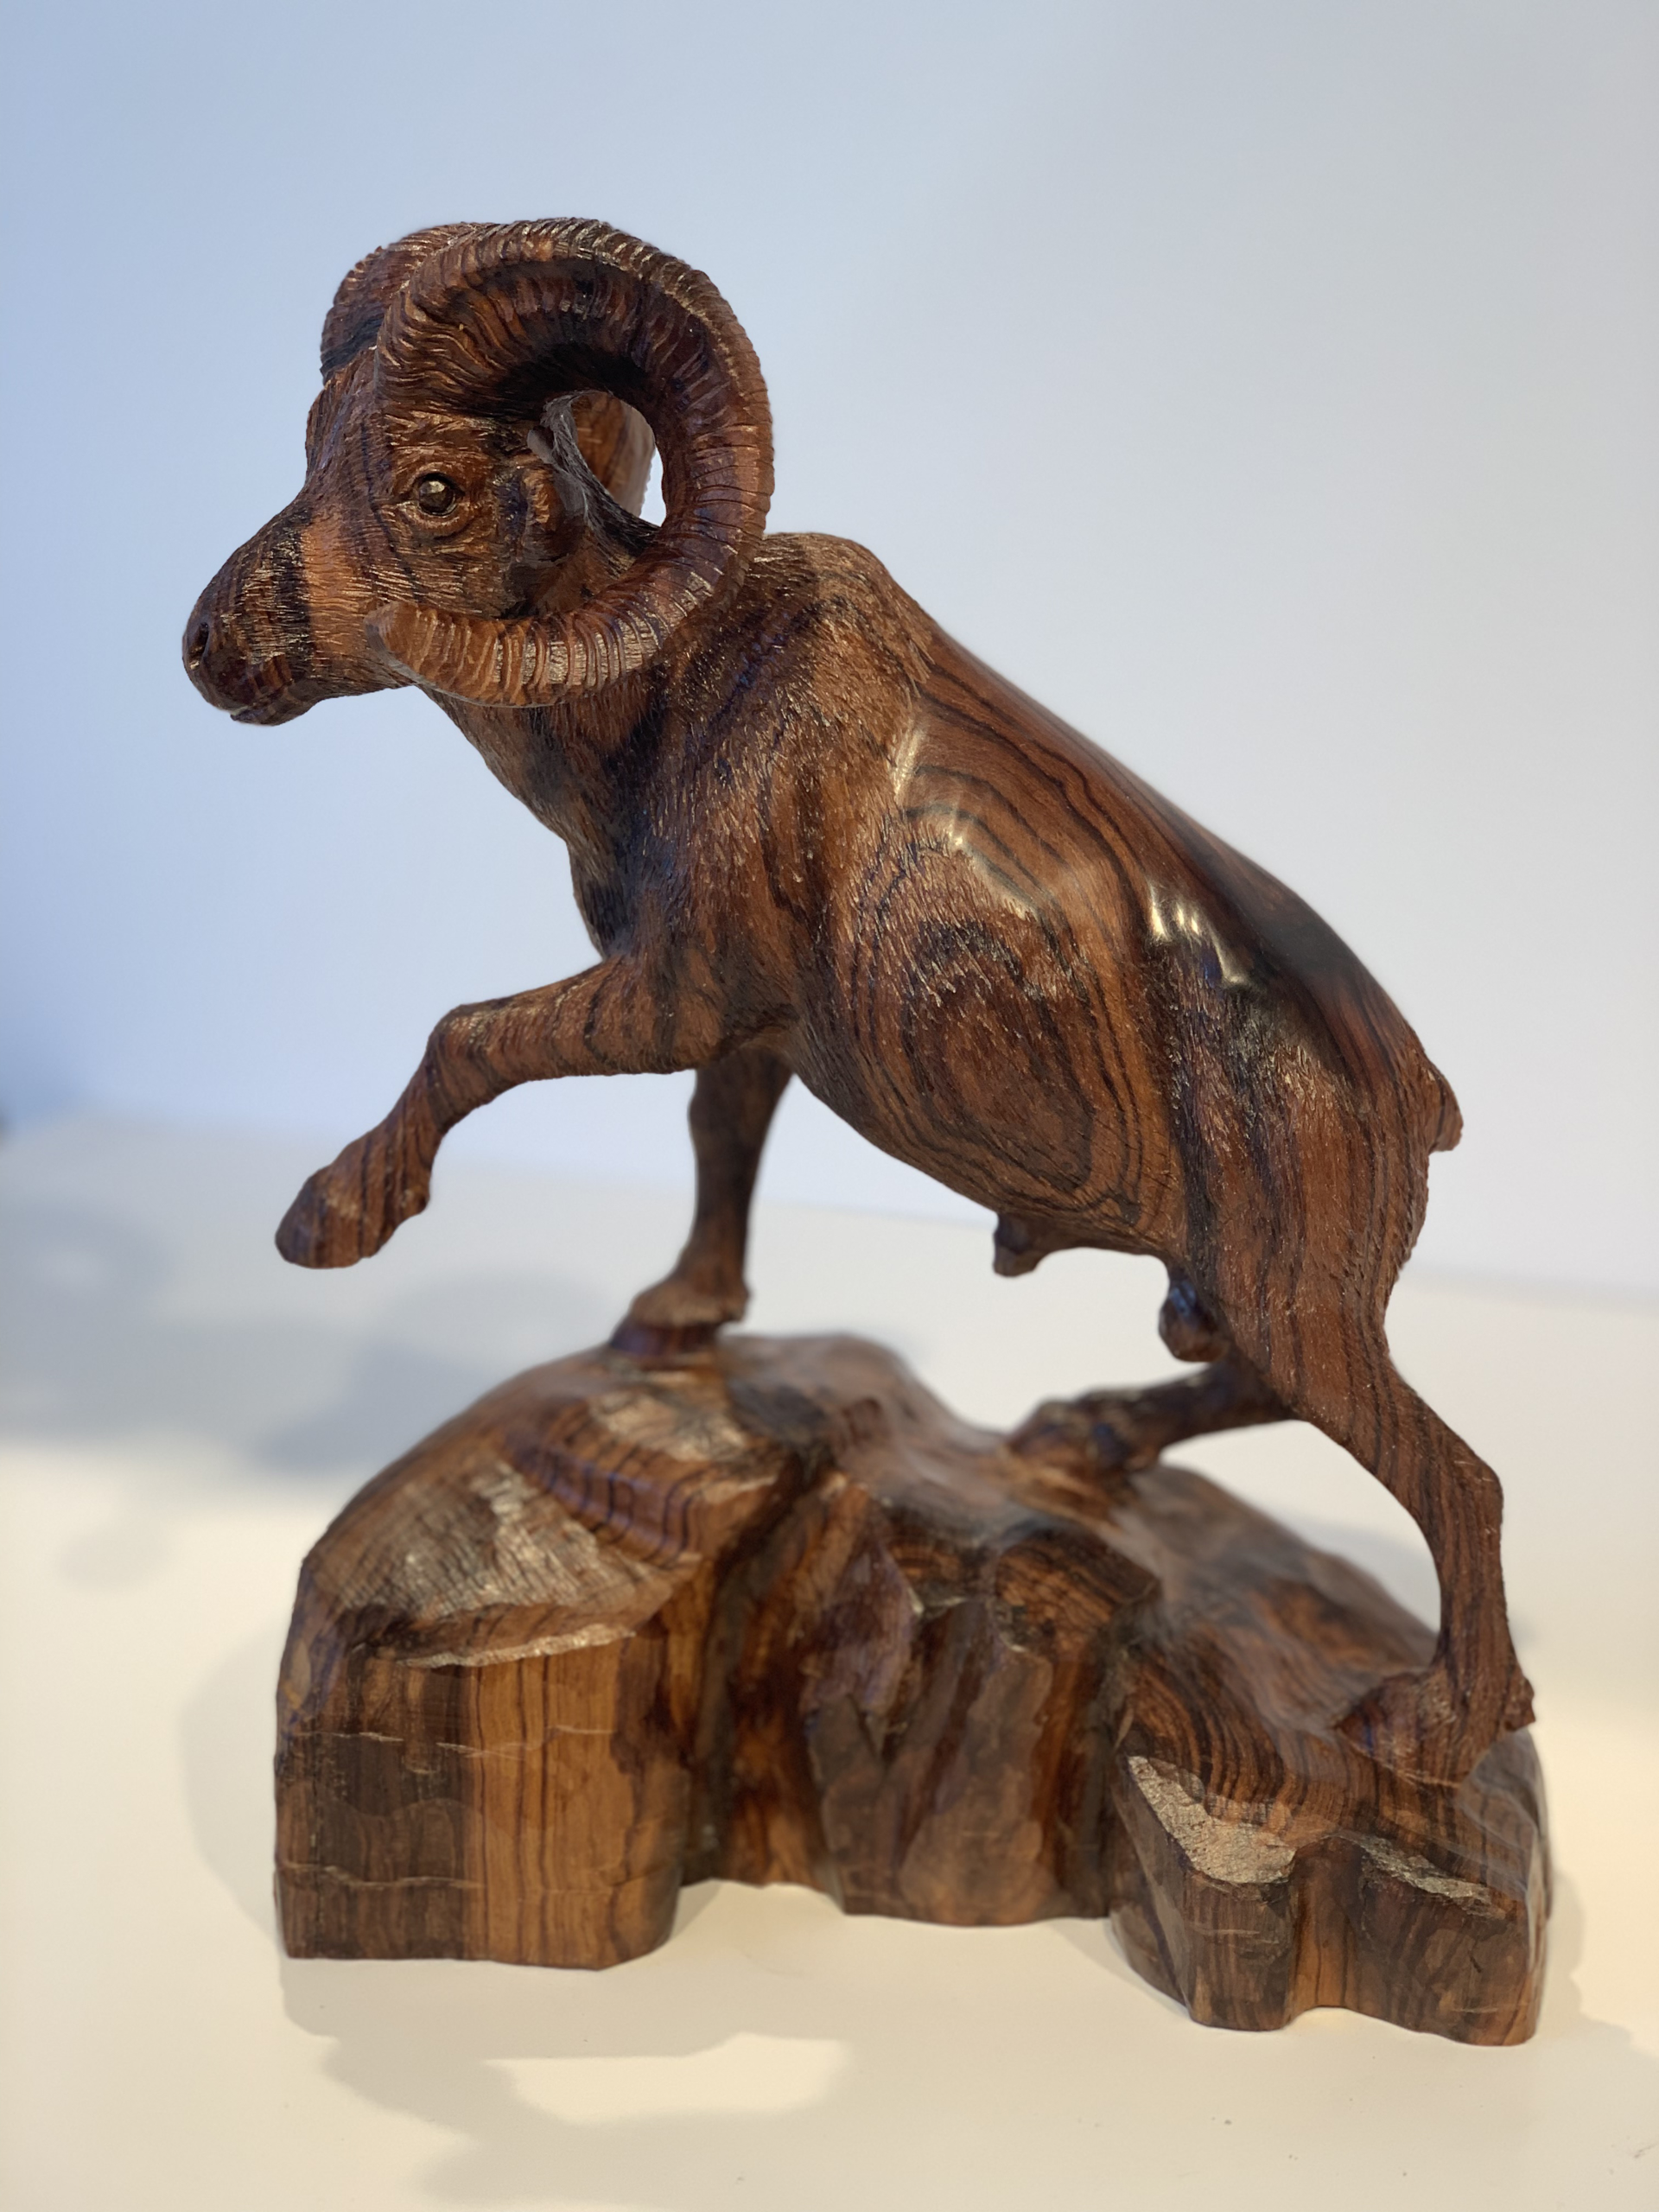 BigHorn by Thomas Suby